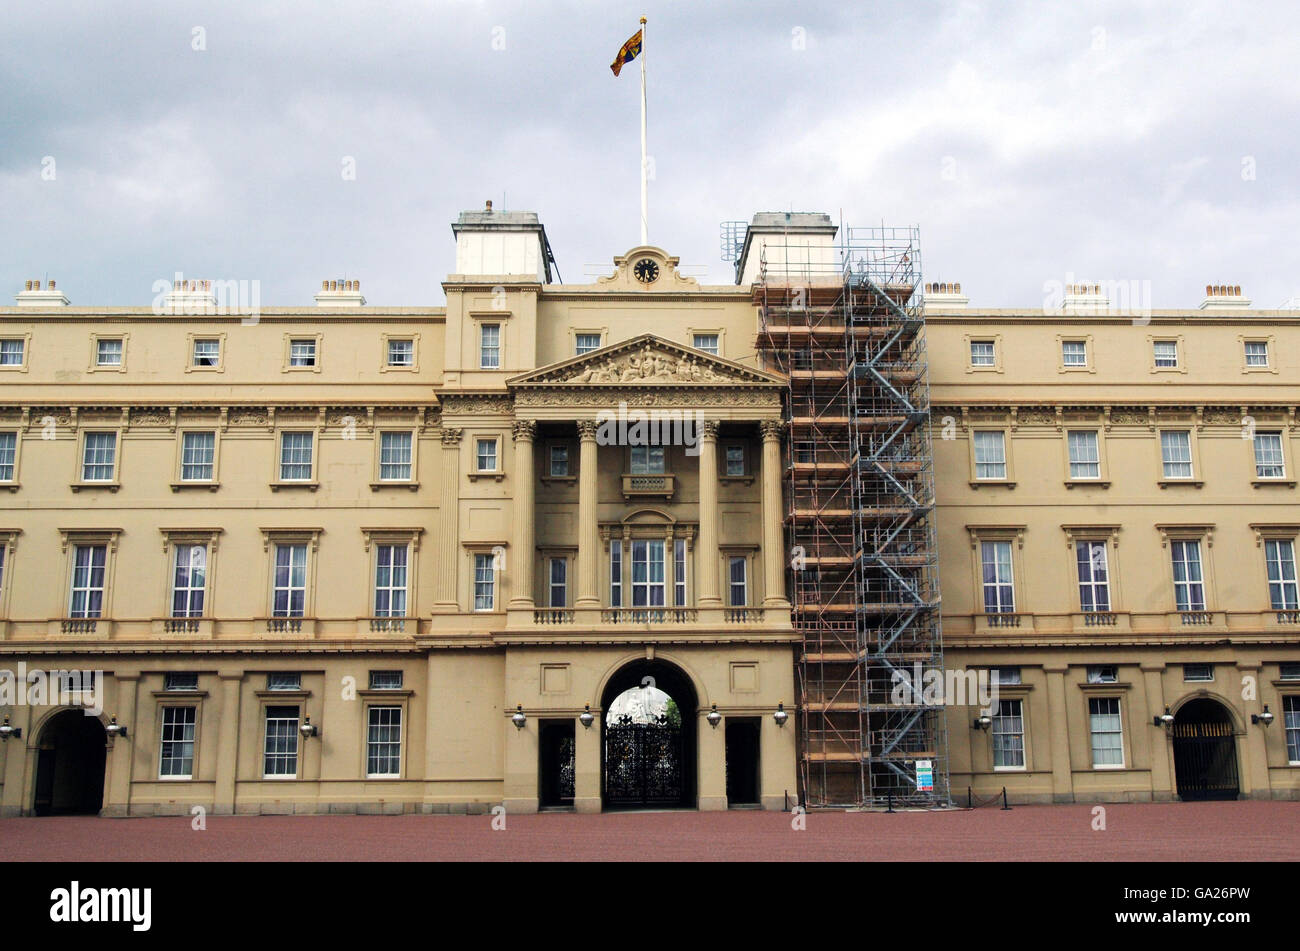 Scaffolding to access badly weathered stone cornicing and roofing in the quadrangle of Buckingham Palace, London. Stock Photo